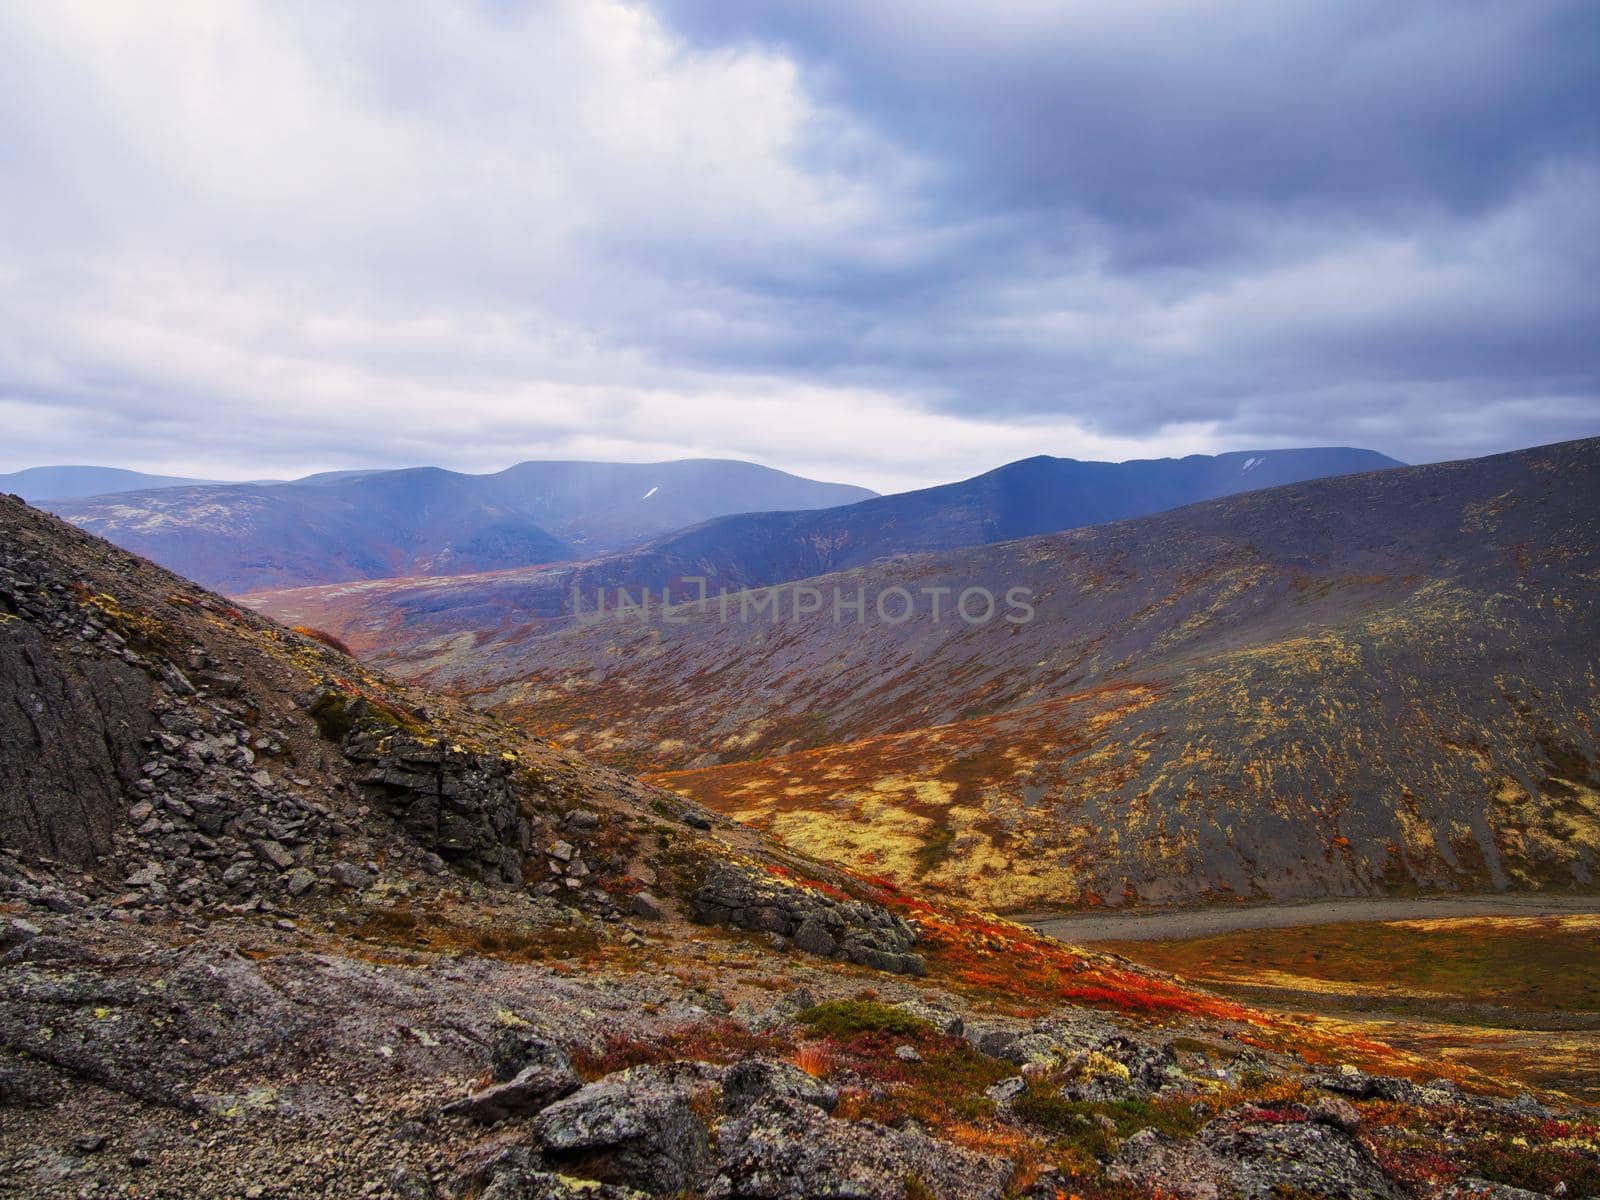 North Russia Khibiny mountains in autumn mountain lake and forest. Murmansk region by Andre1ns